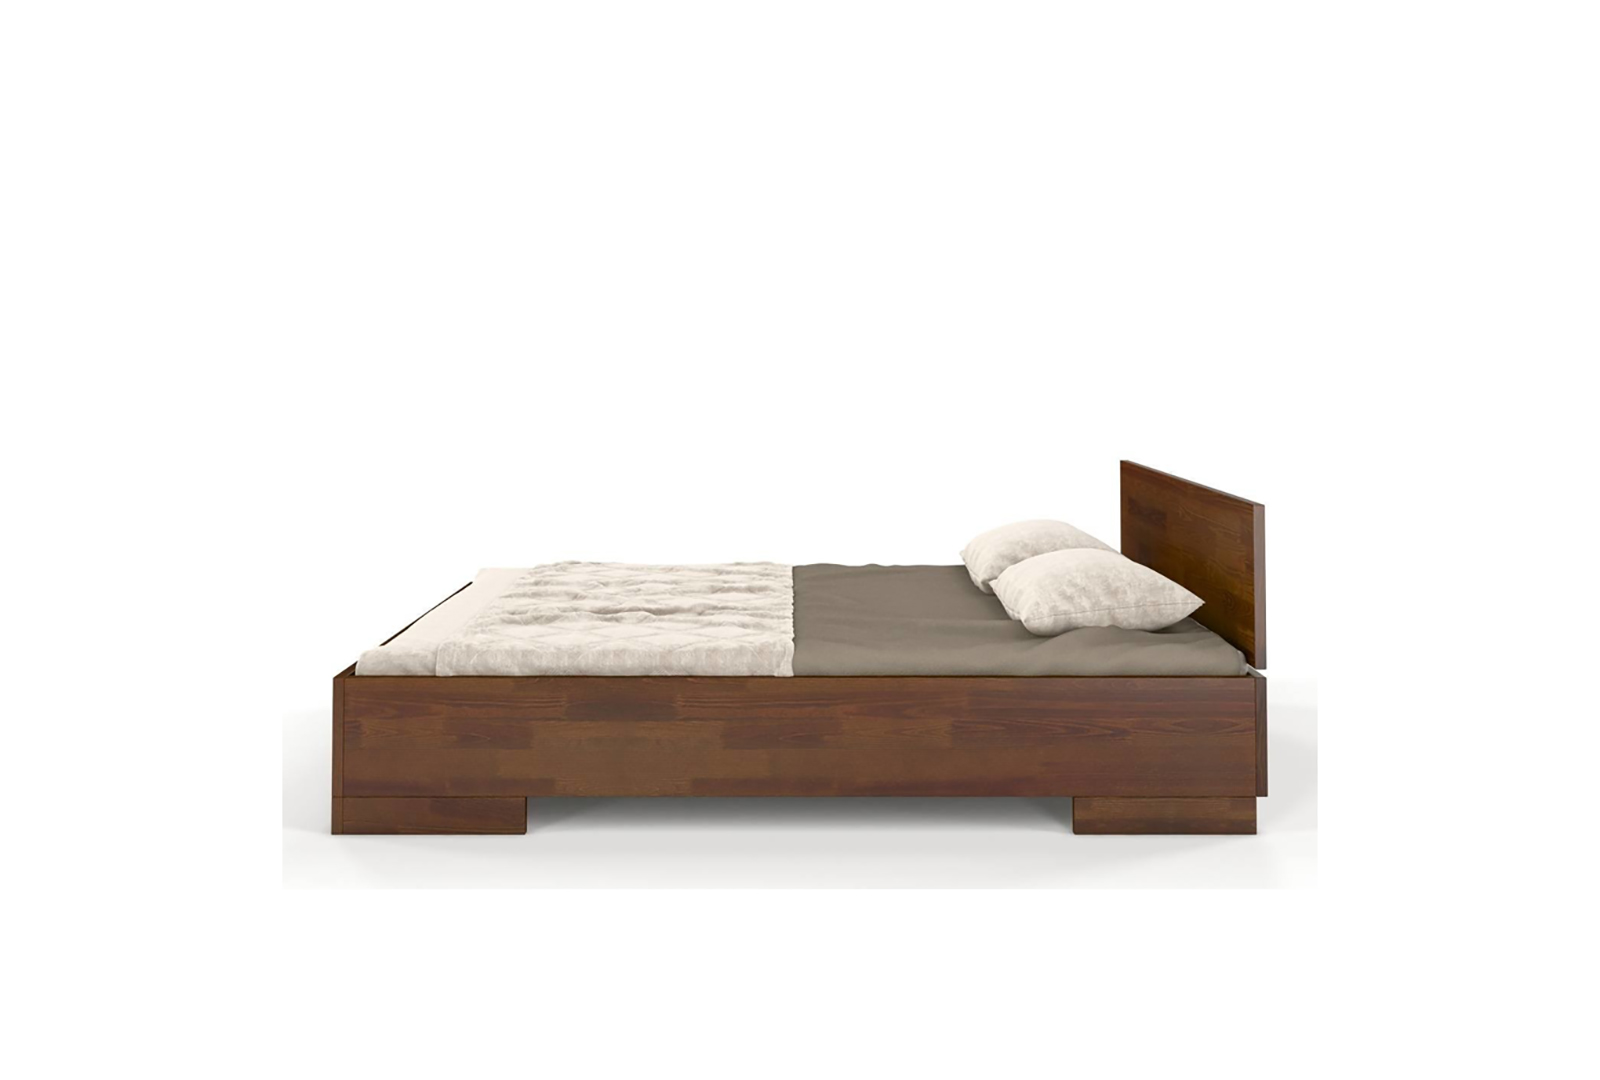 WOODEN PINE BED SKANDICA SPECTRUM MAXI AND LONG